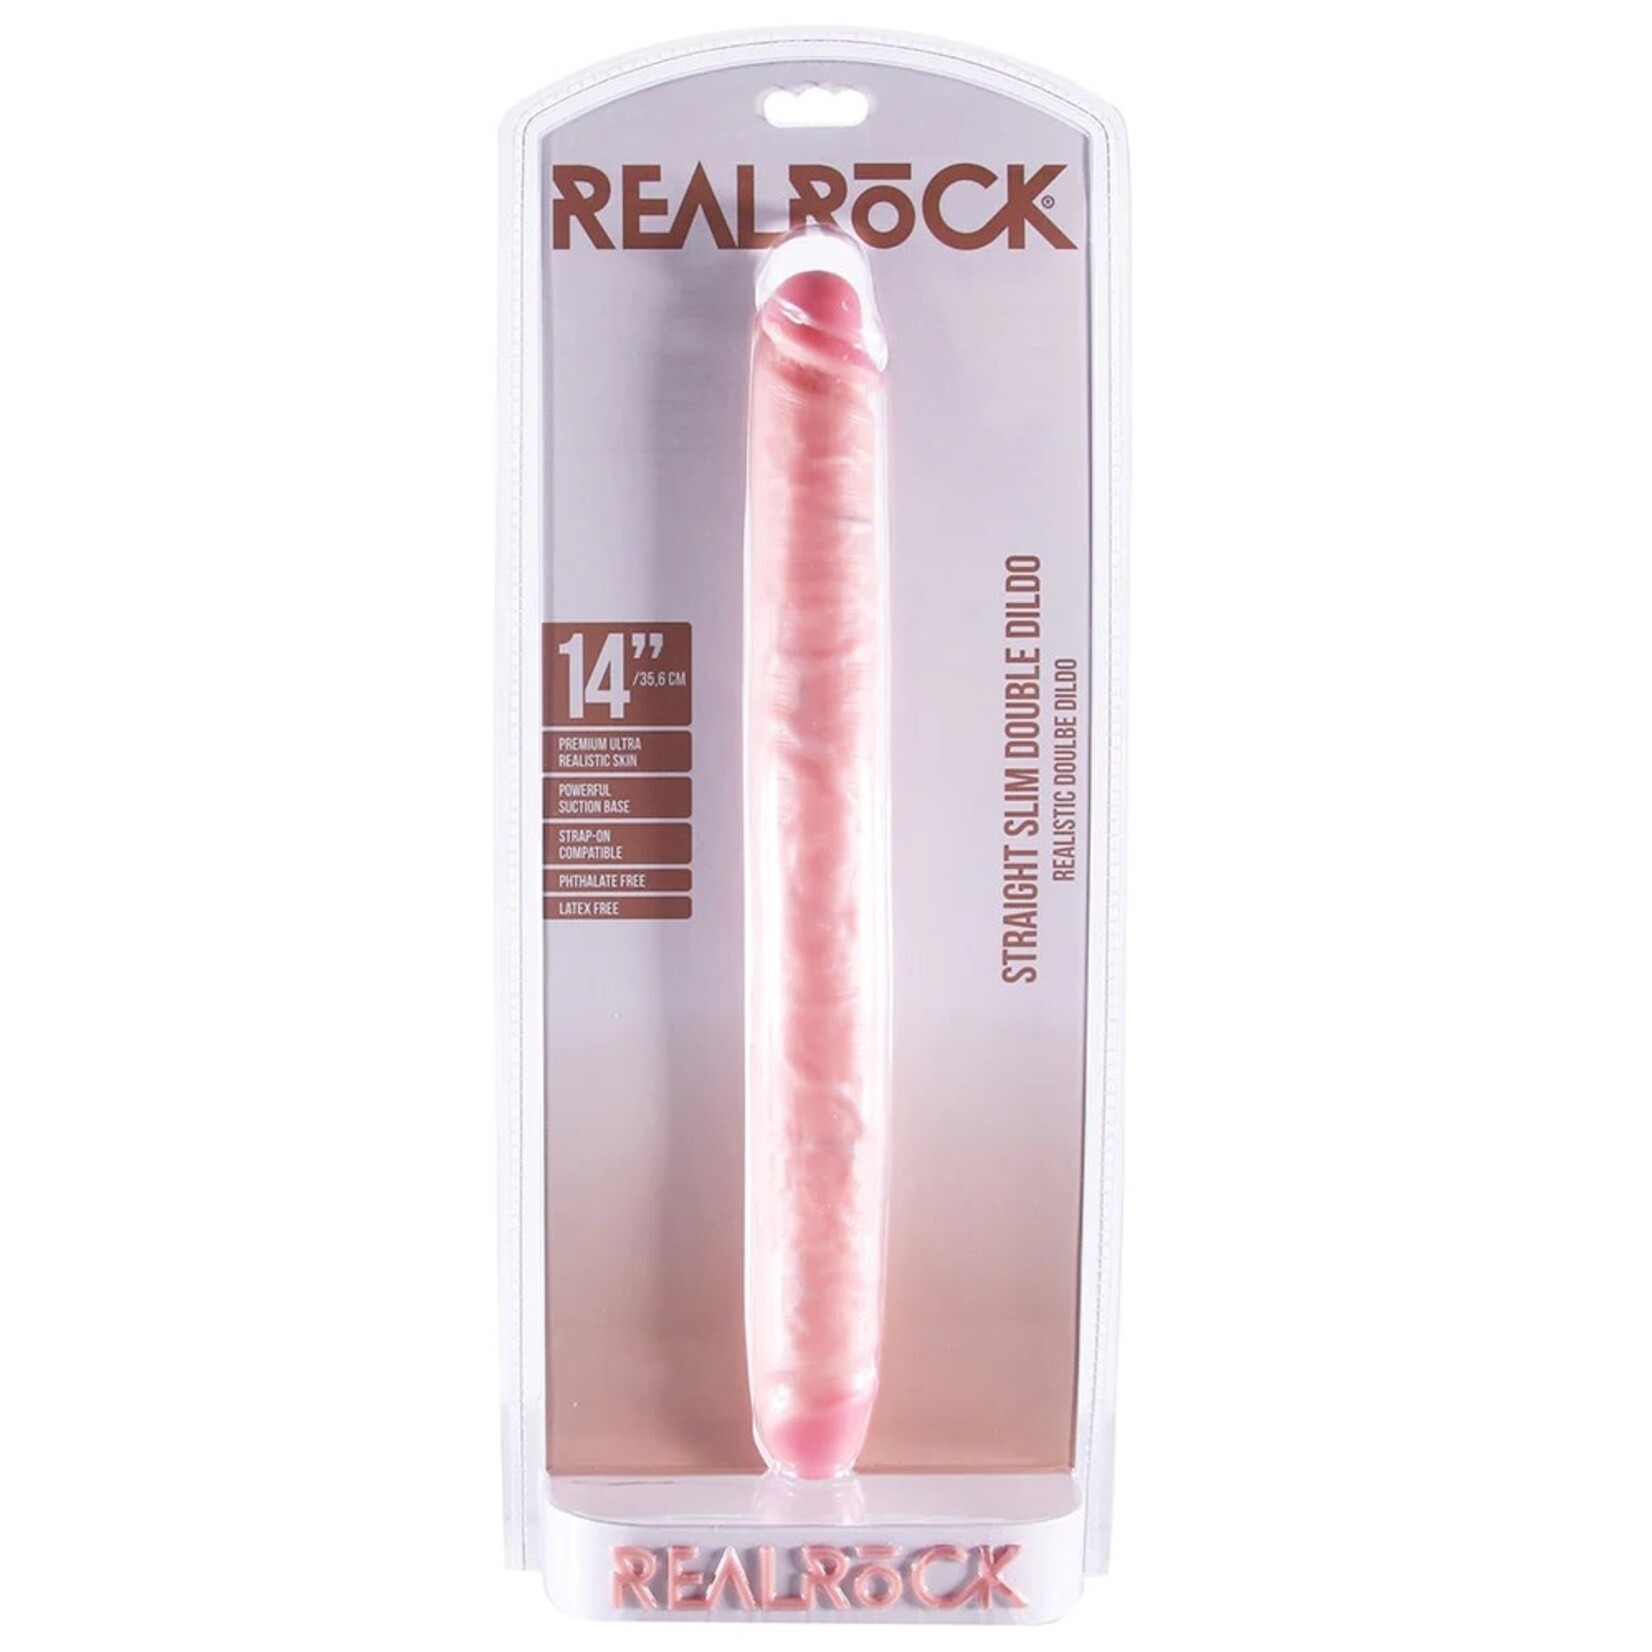 SHOTS REALROCK SLIM DOUBLE ENDED 14 INCH DILDO IN LIGHT